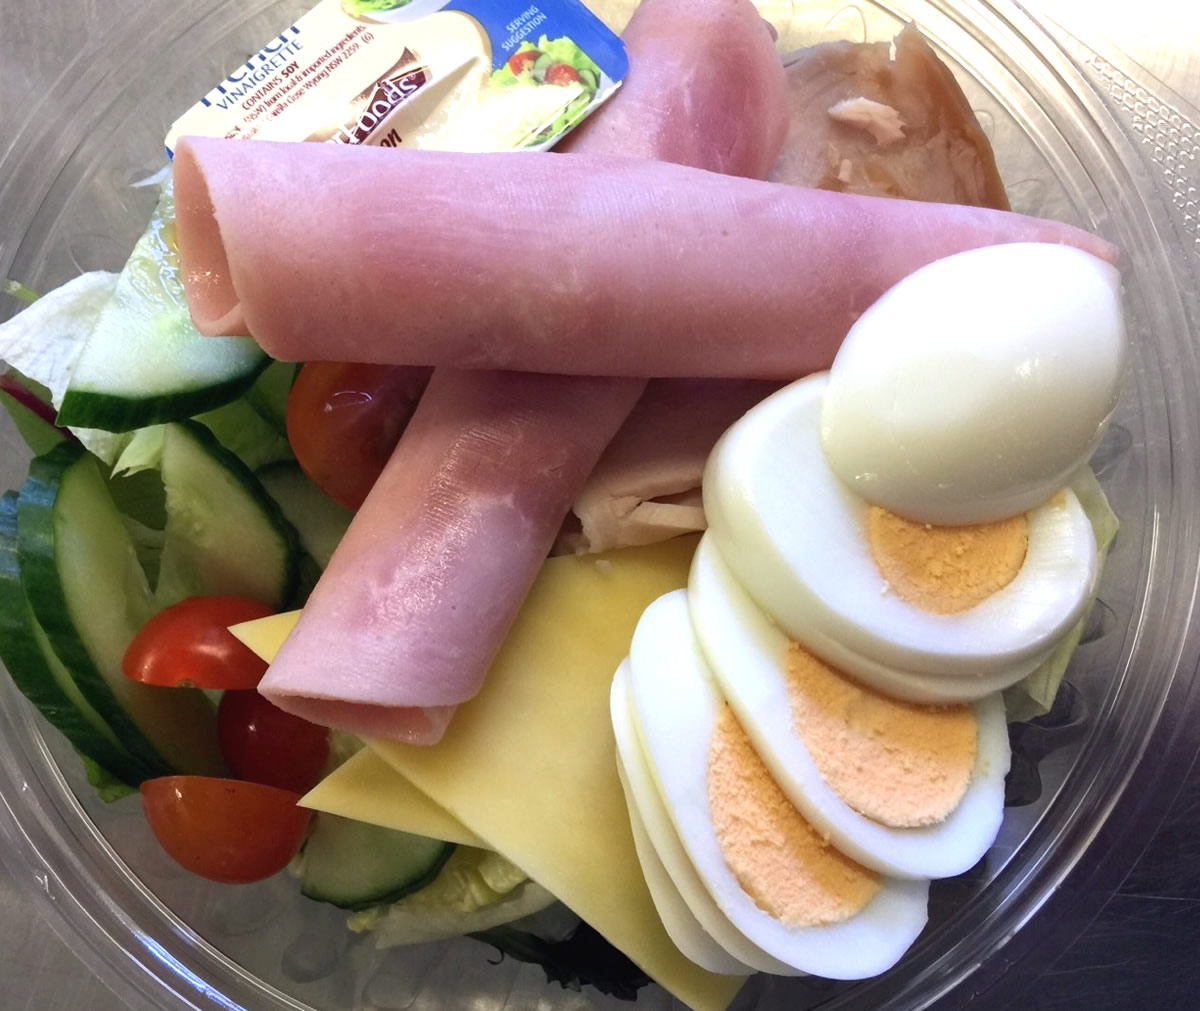 Salads are offered in summertime